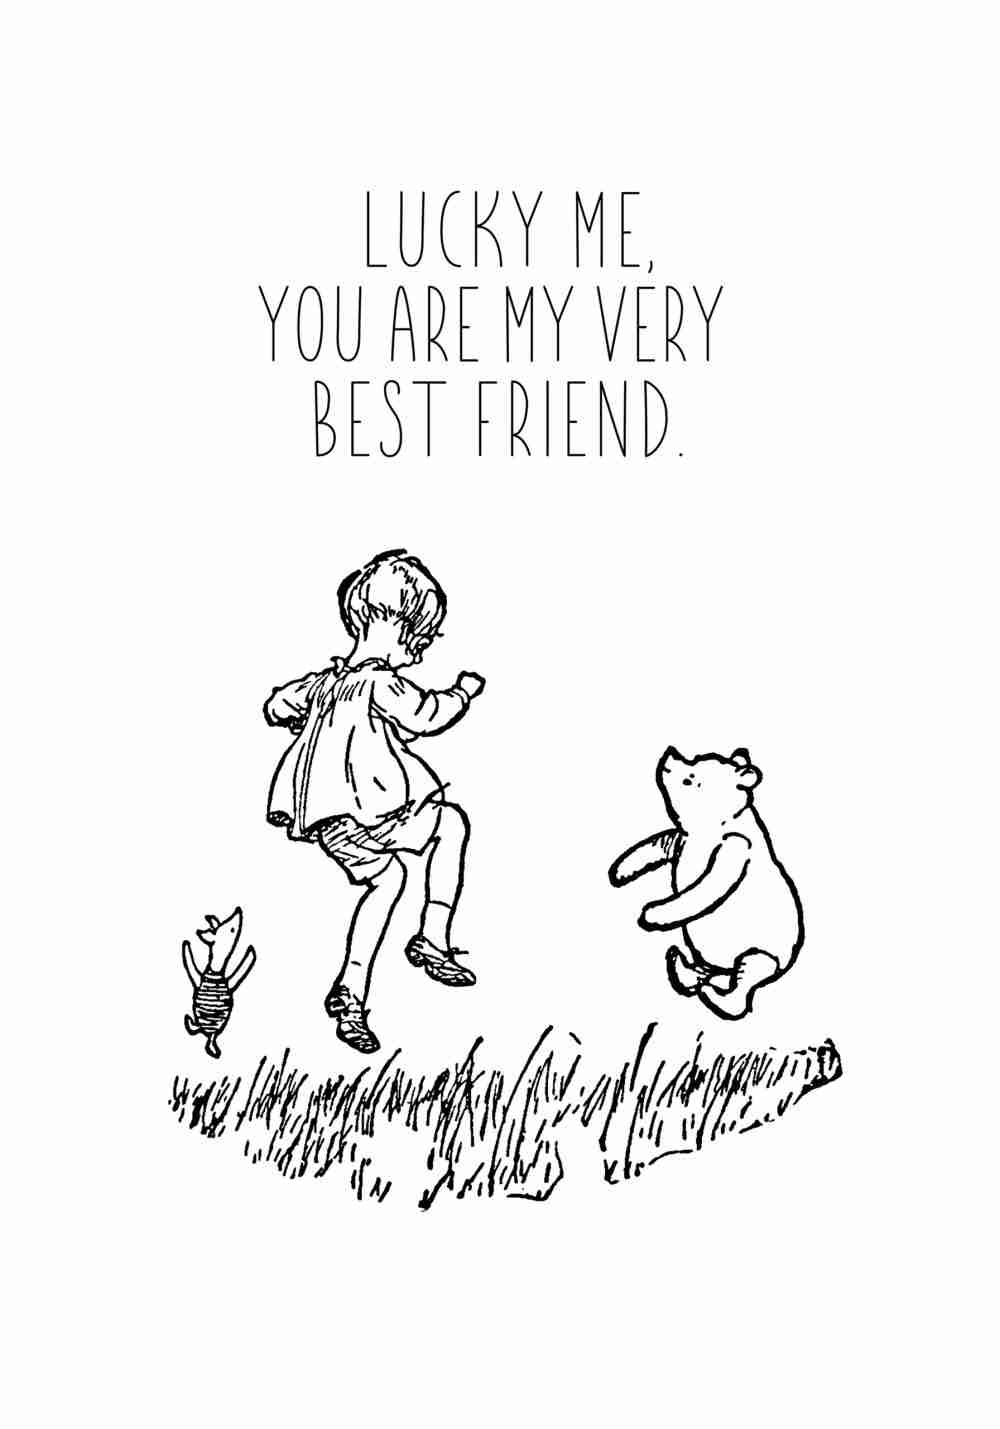 Lucky Me, You Are My Very Best Friend Poster